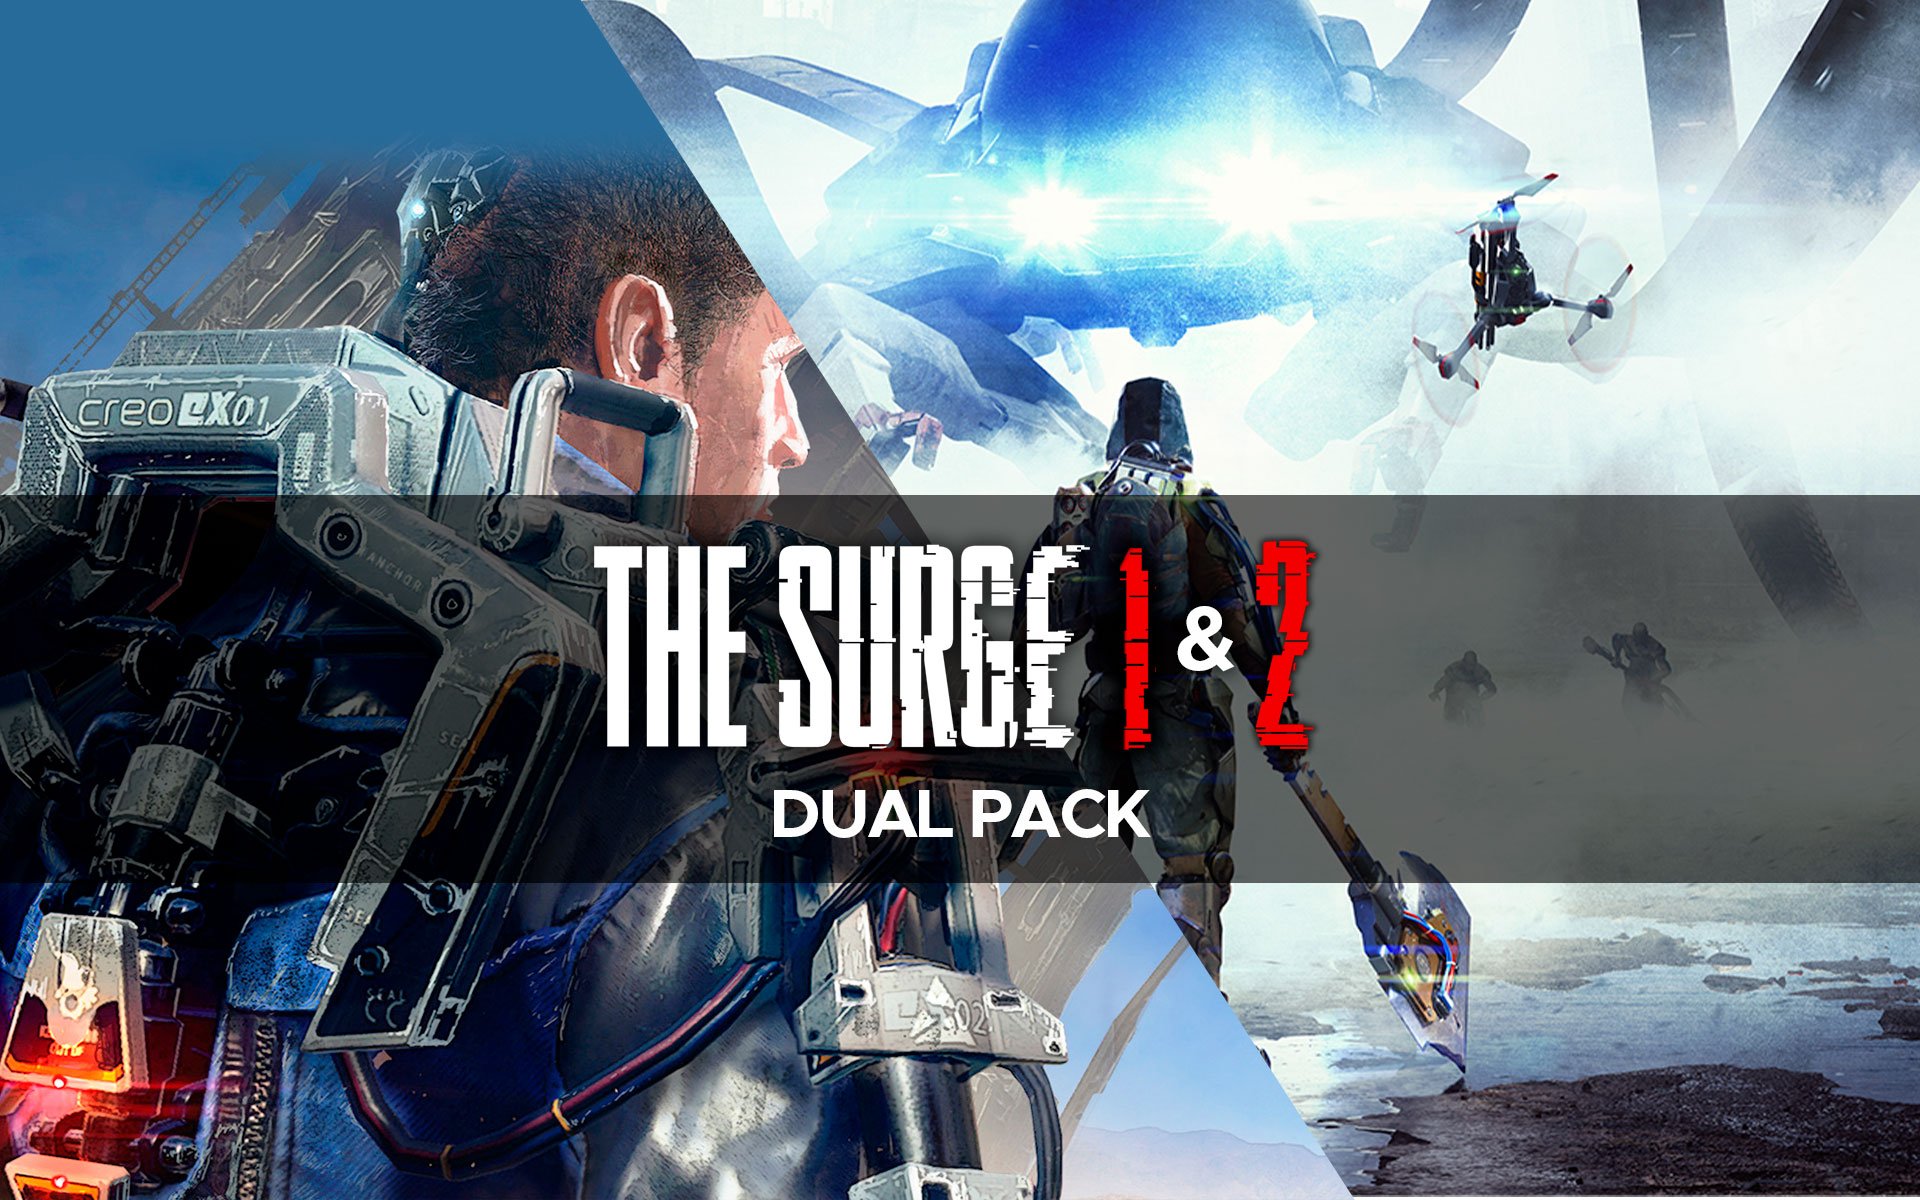 The Surge 1 &amp; 2 Dual Pack | Hype Games